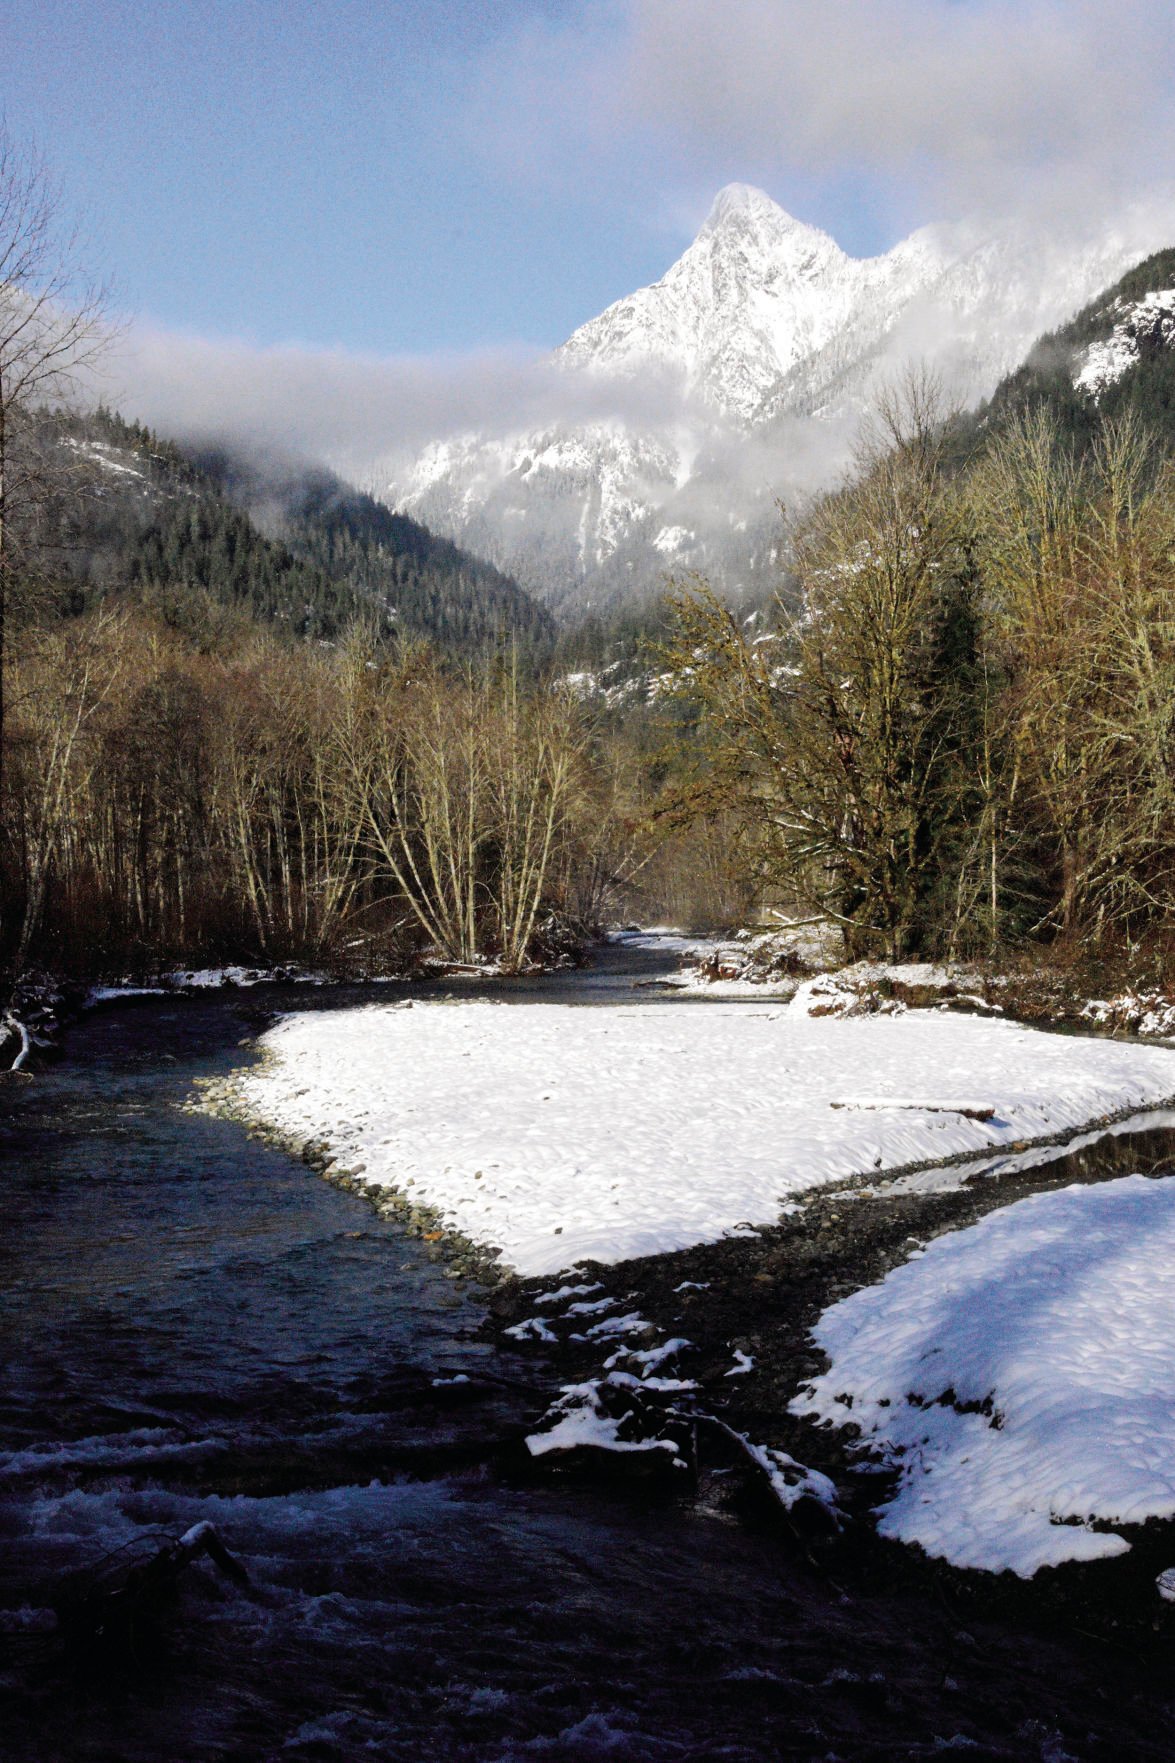 Diobsud Creek sparkles with recent snowcapped peaks